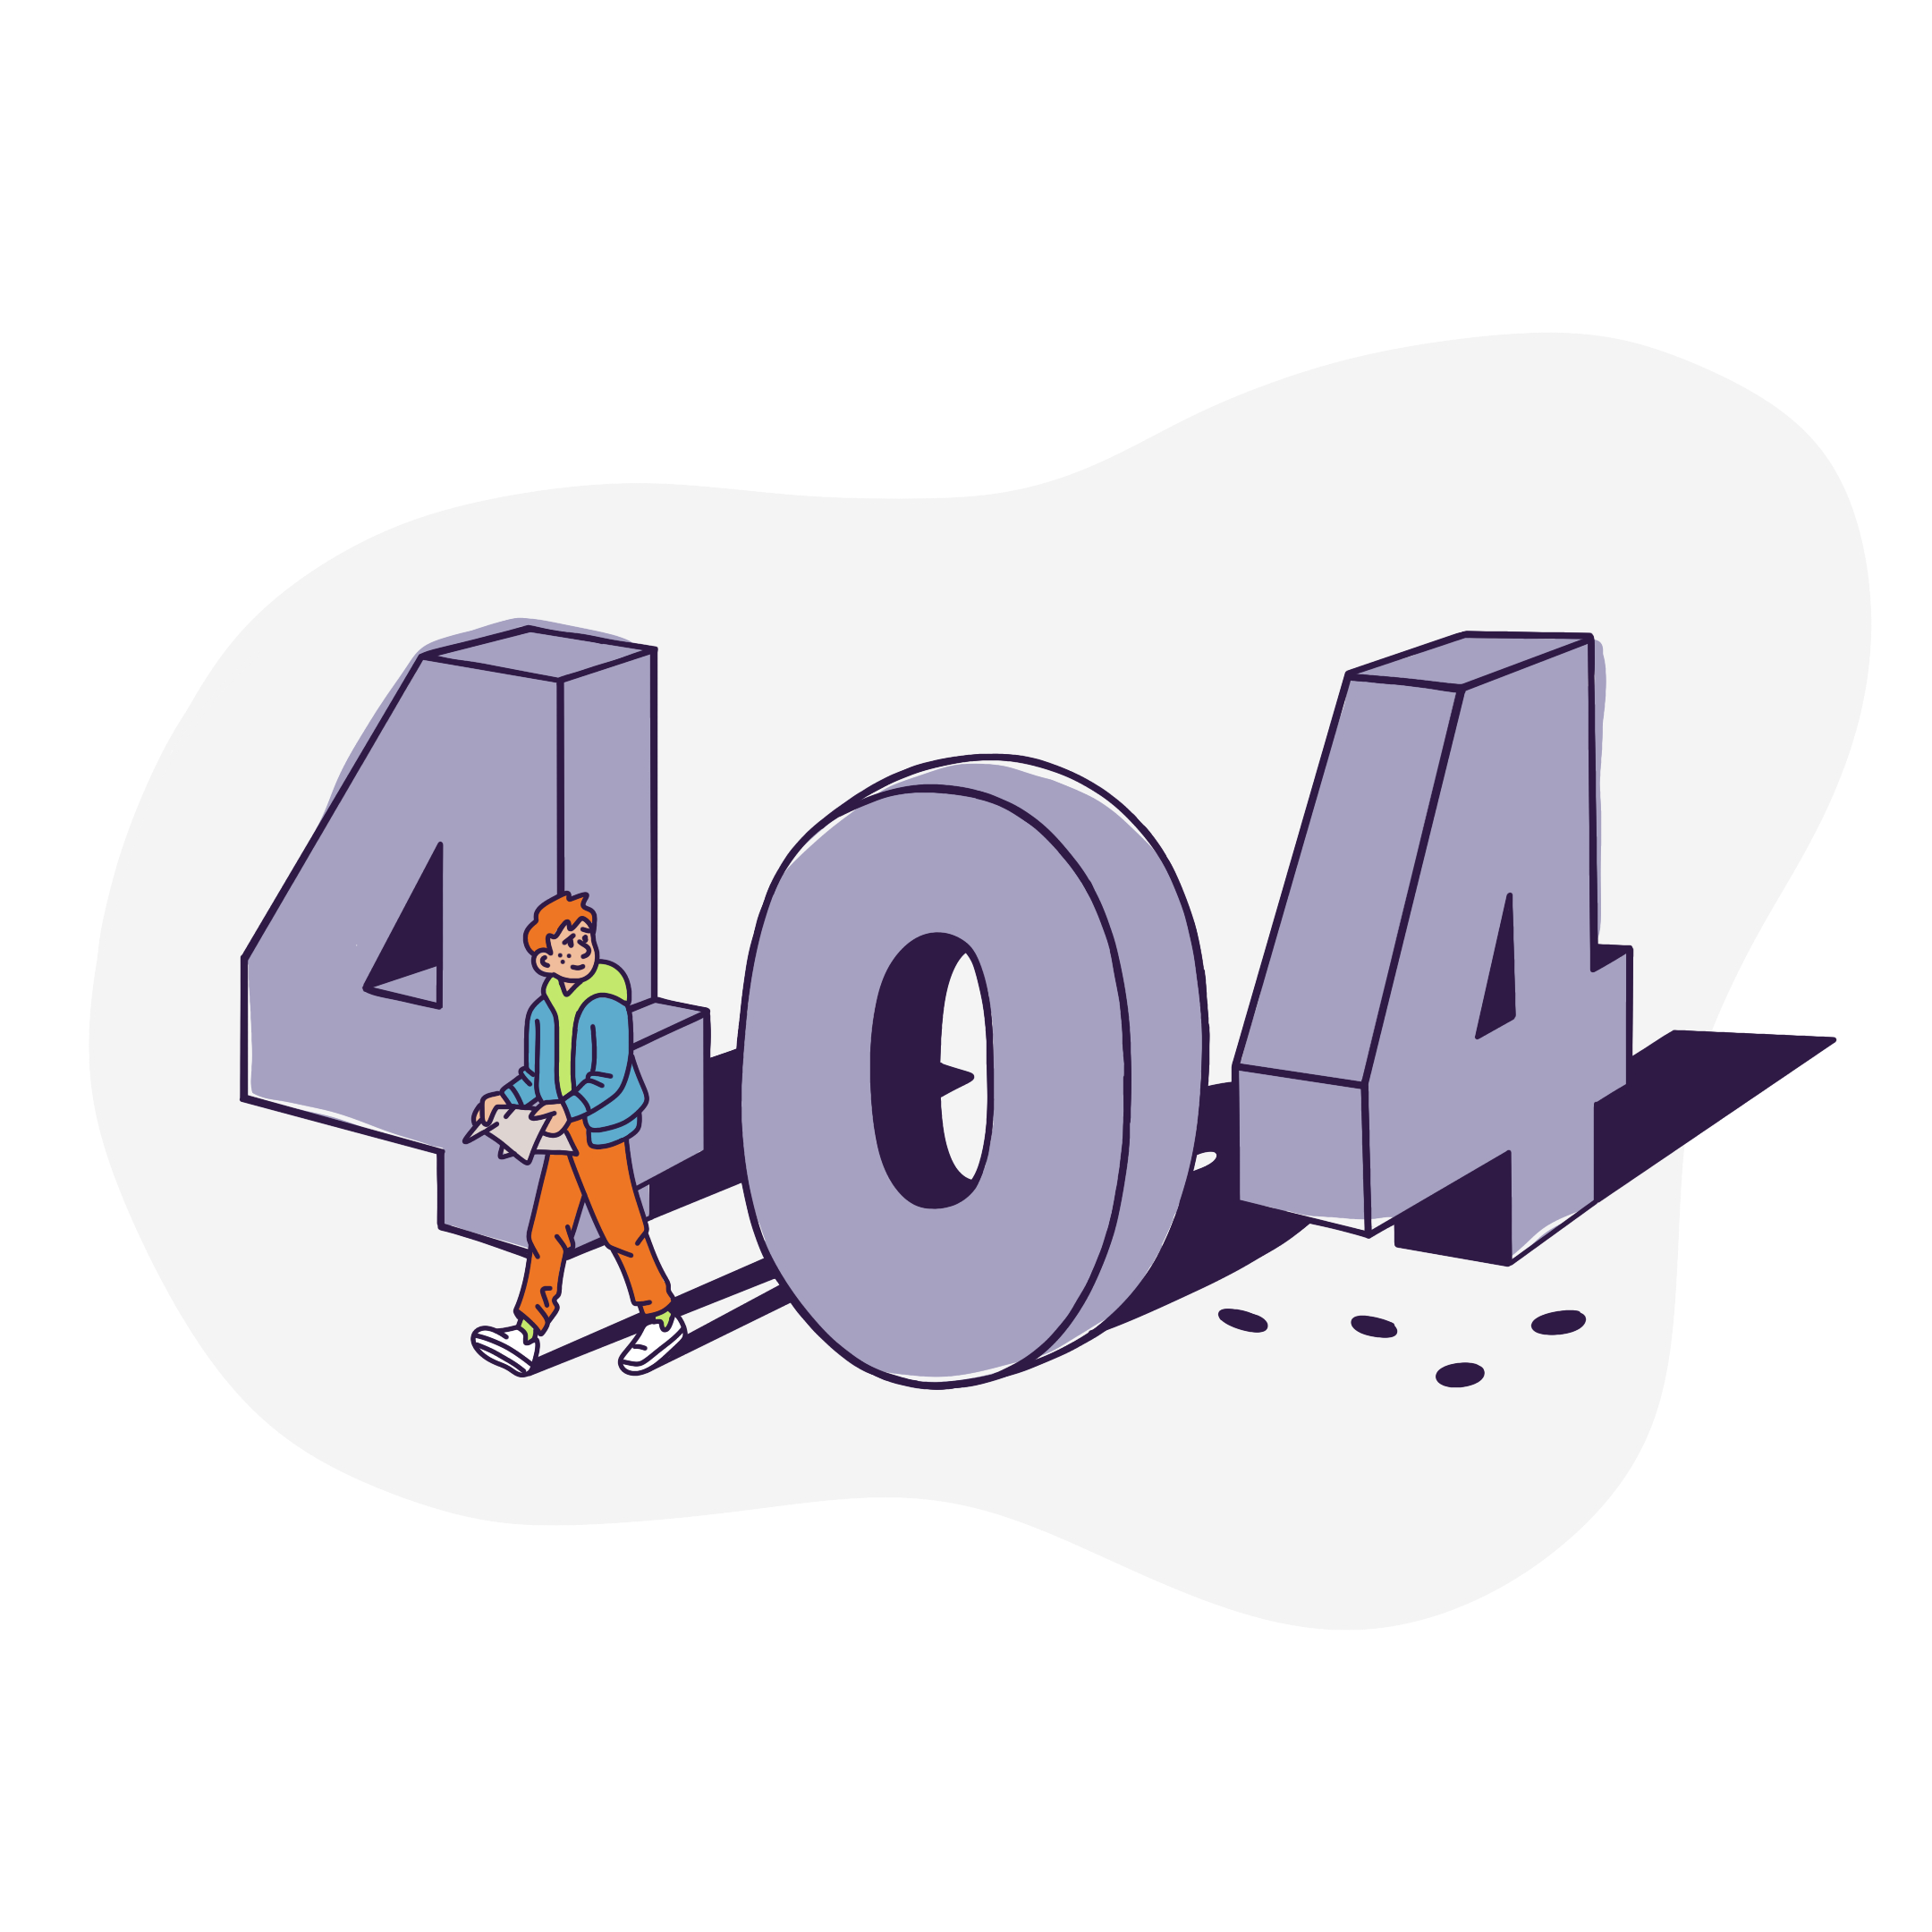 Not all who 404 are lost.